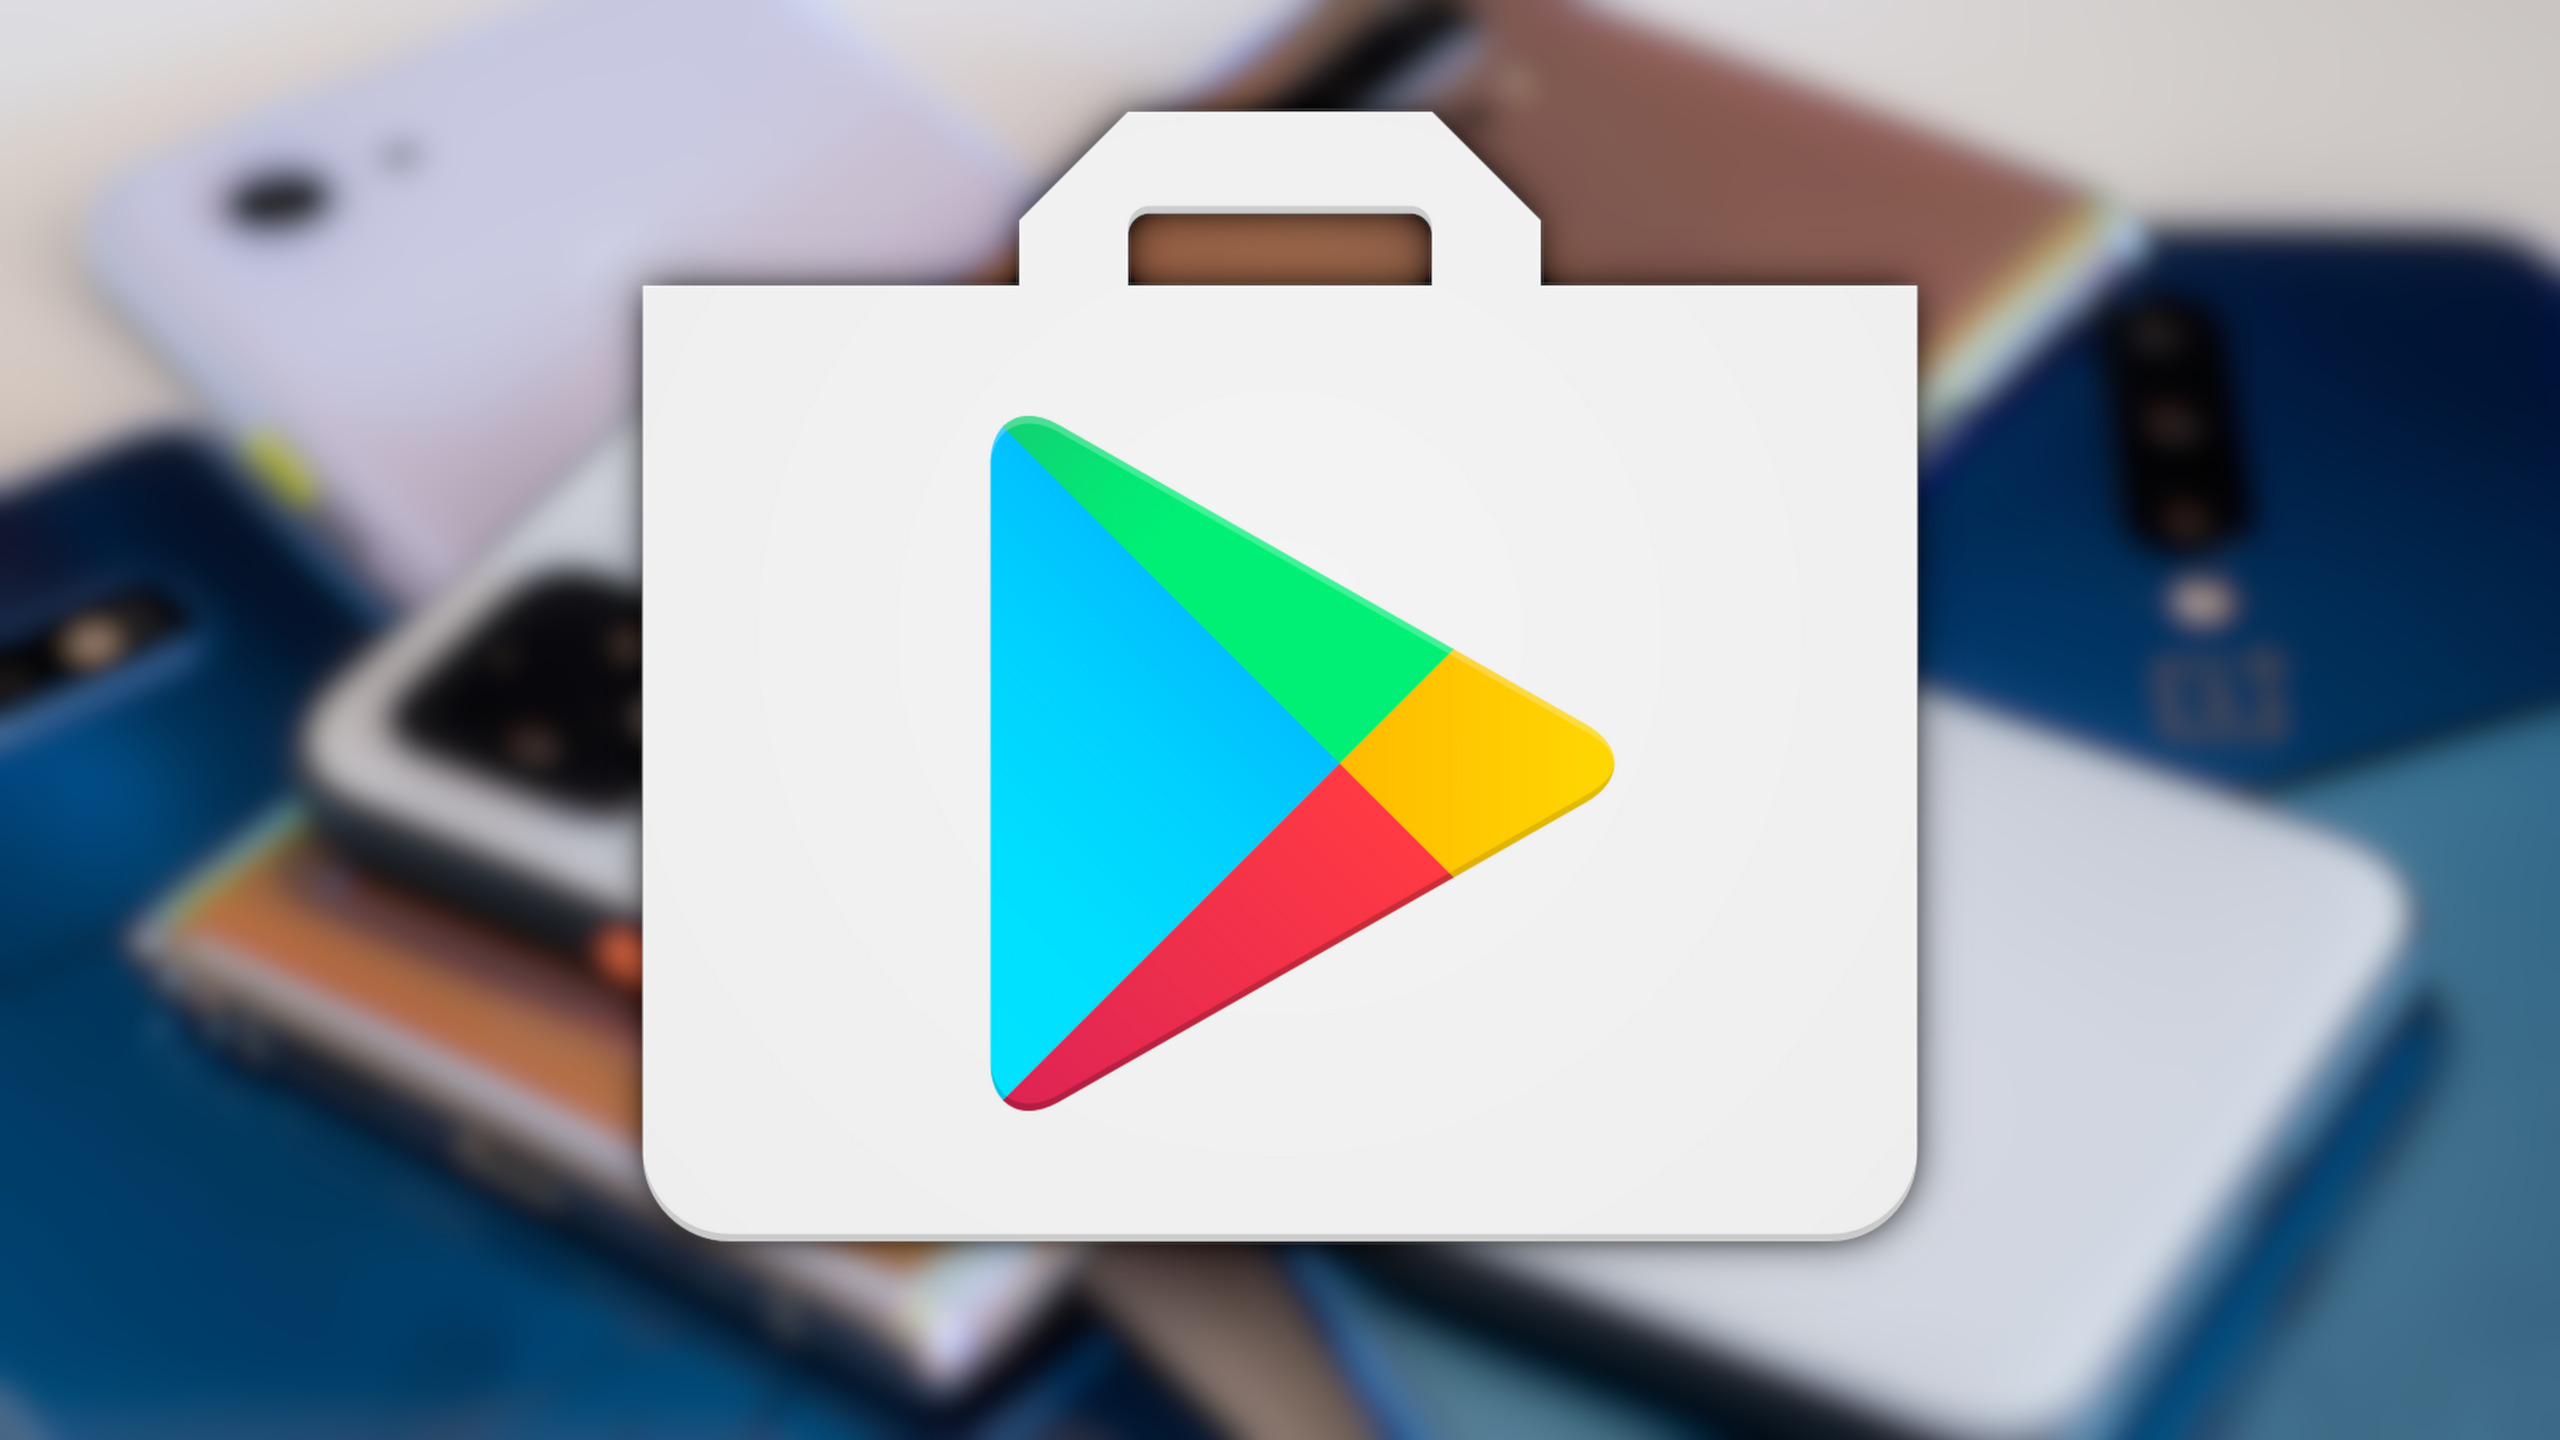 google play store will not download